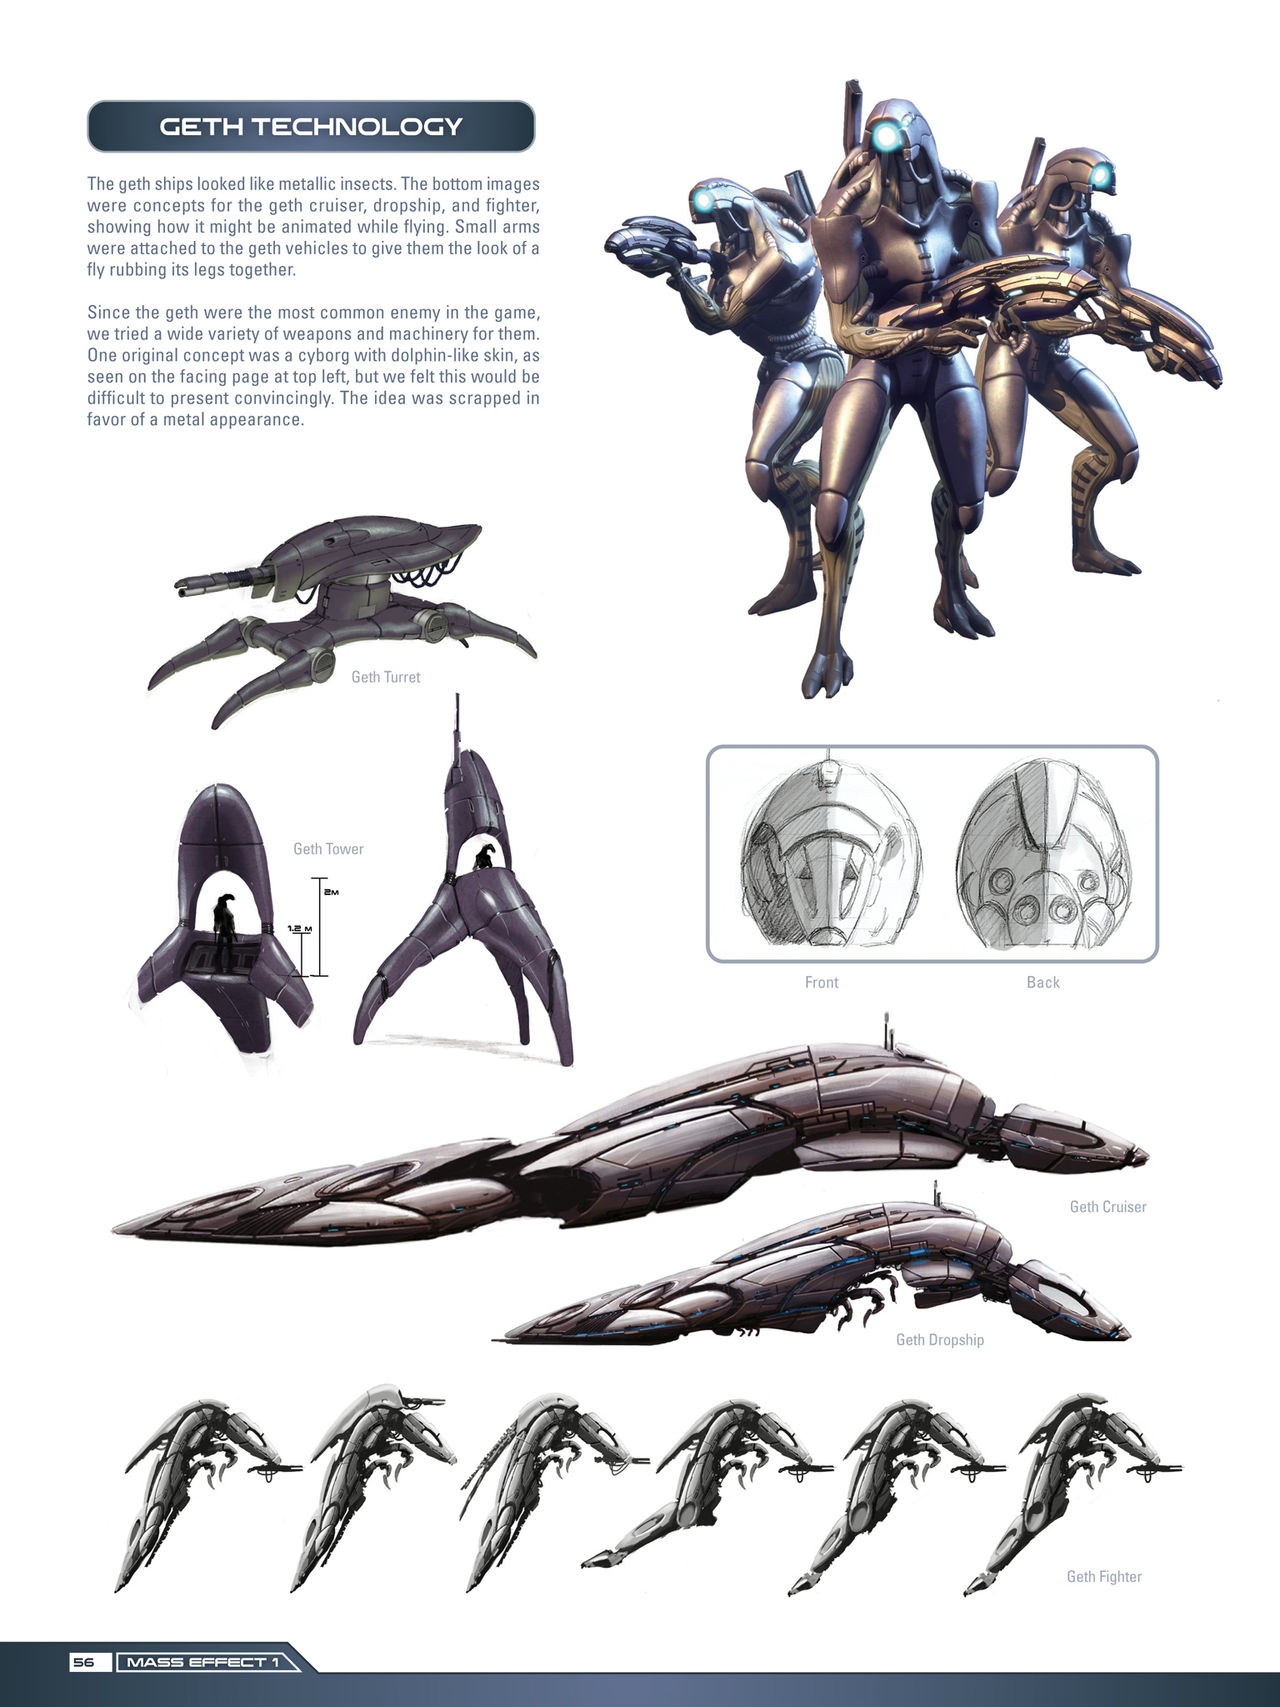 The Art of the Mass Effect Trilogy - Expanded Edition 56